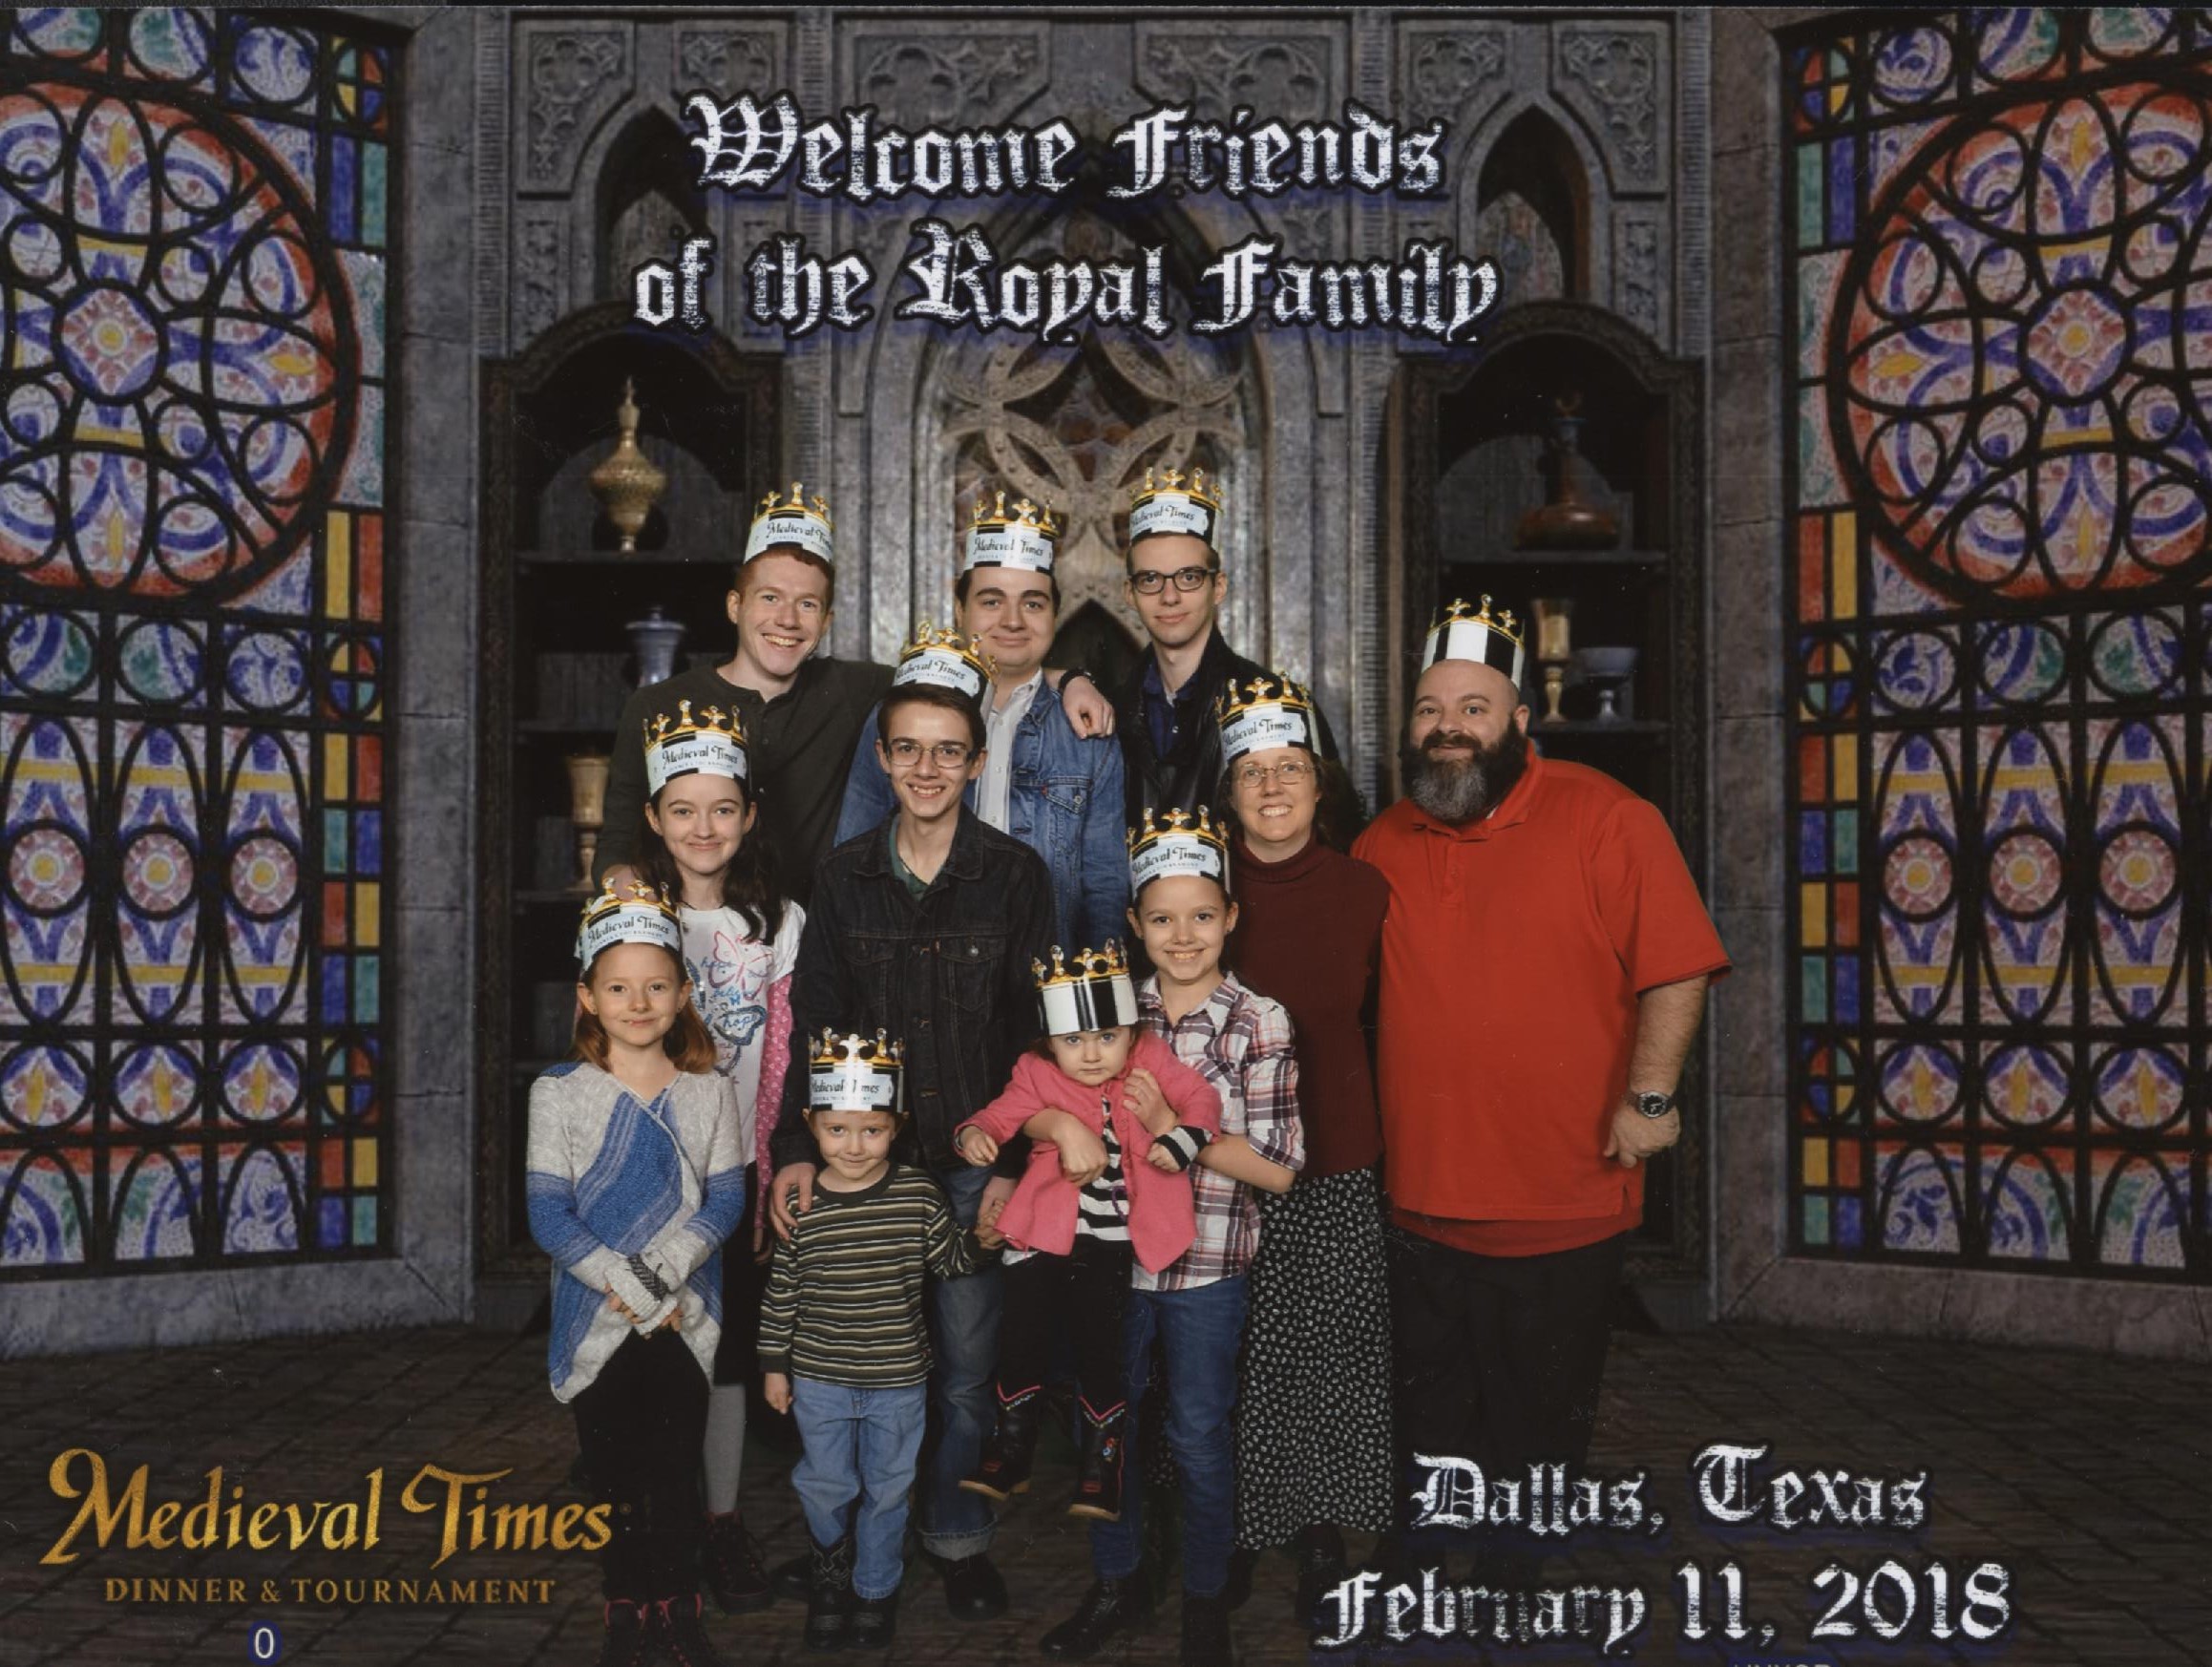 Medieval Times Stained Glass Windows Background. Top Text: 'Welcome friends of the Royal family.' Catie, Jacinta, Michael, Becket, Cross, Nunzio, Bernie holding Cecilia, Joseph, Nunzio, Jen and Justin! Bottom Text: 'Dallas, Texas February 11, 2018'